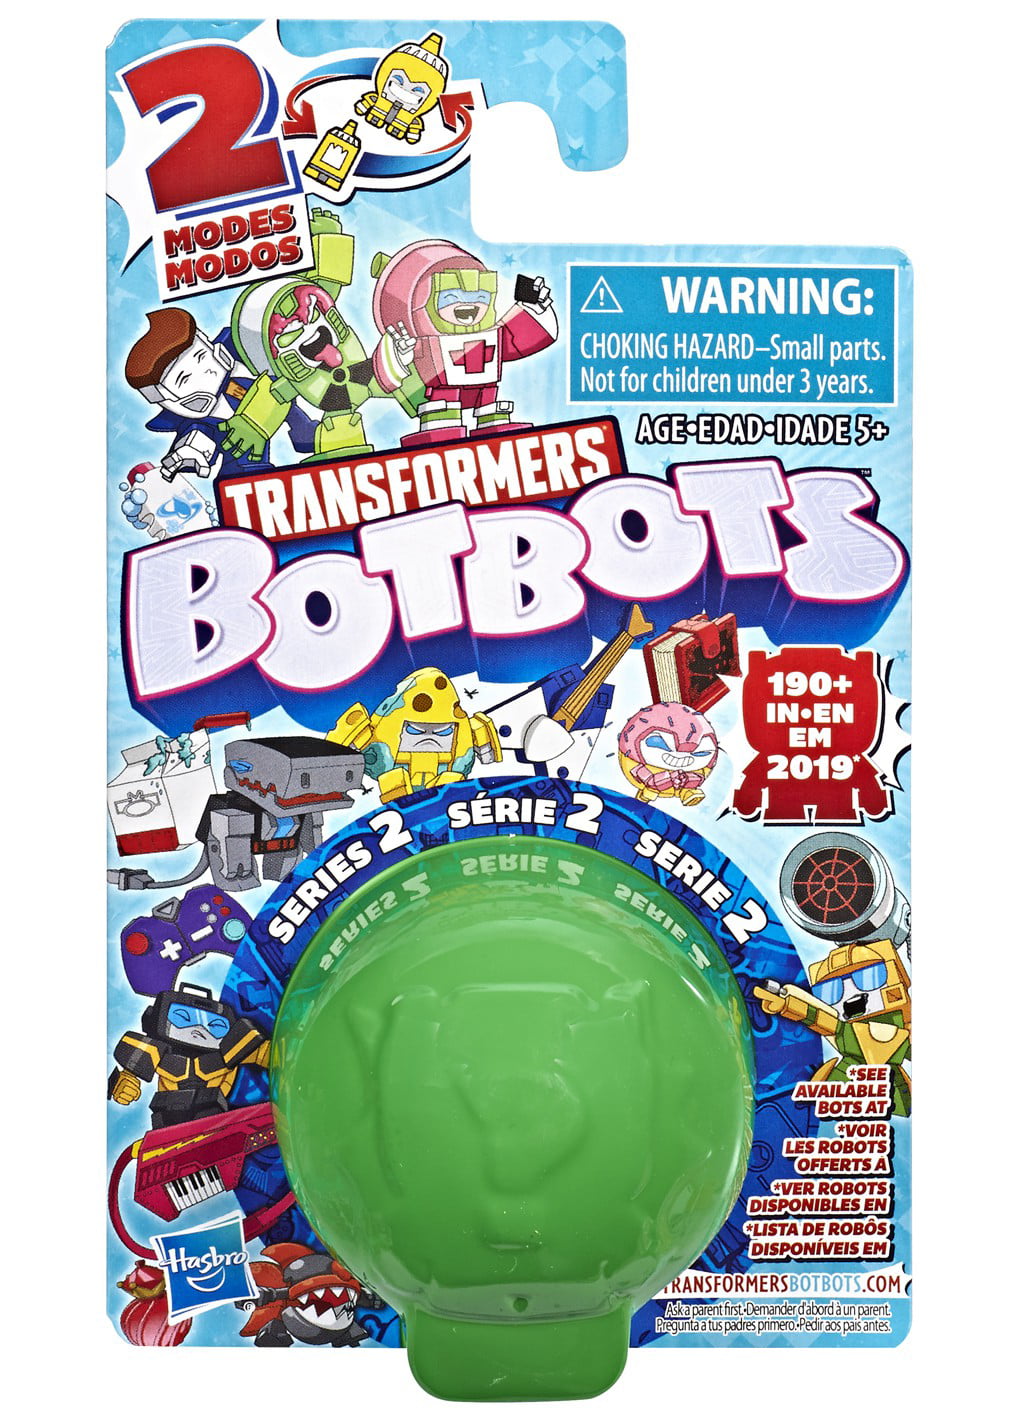 Details about   TP ITCH Transformers BotBots Series 2 Toilet Troop Hasbro 2019 toilet paper 